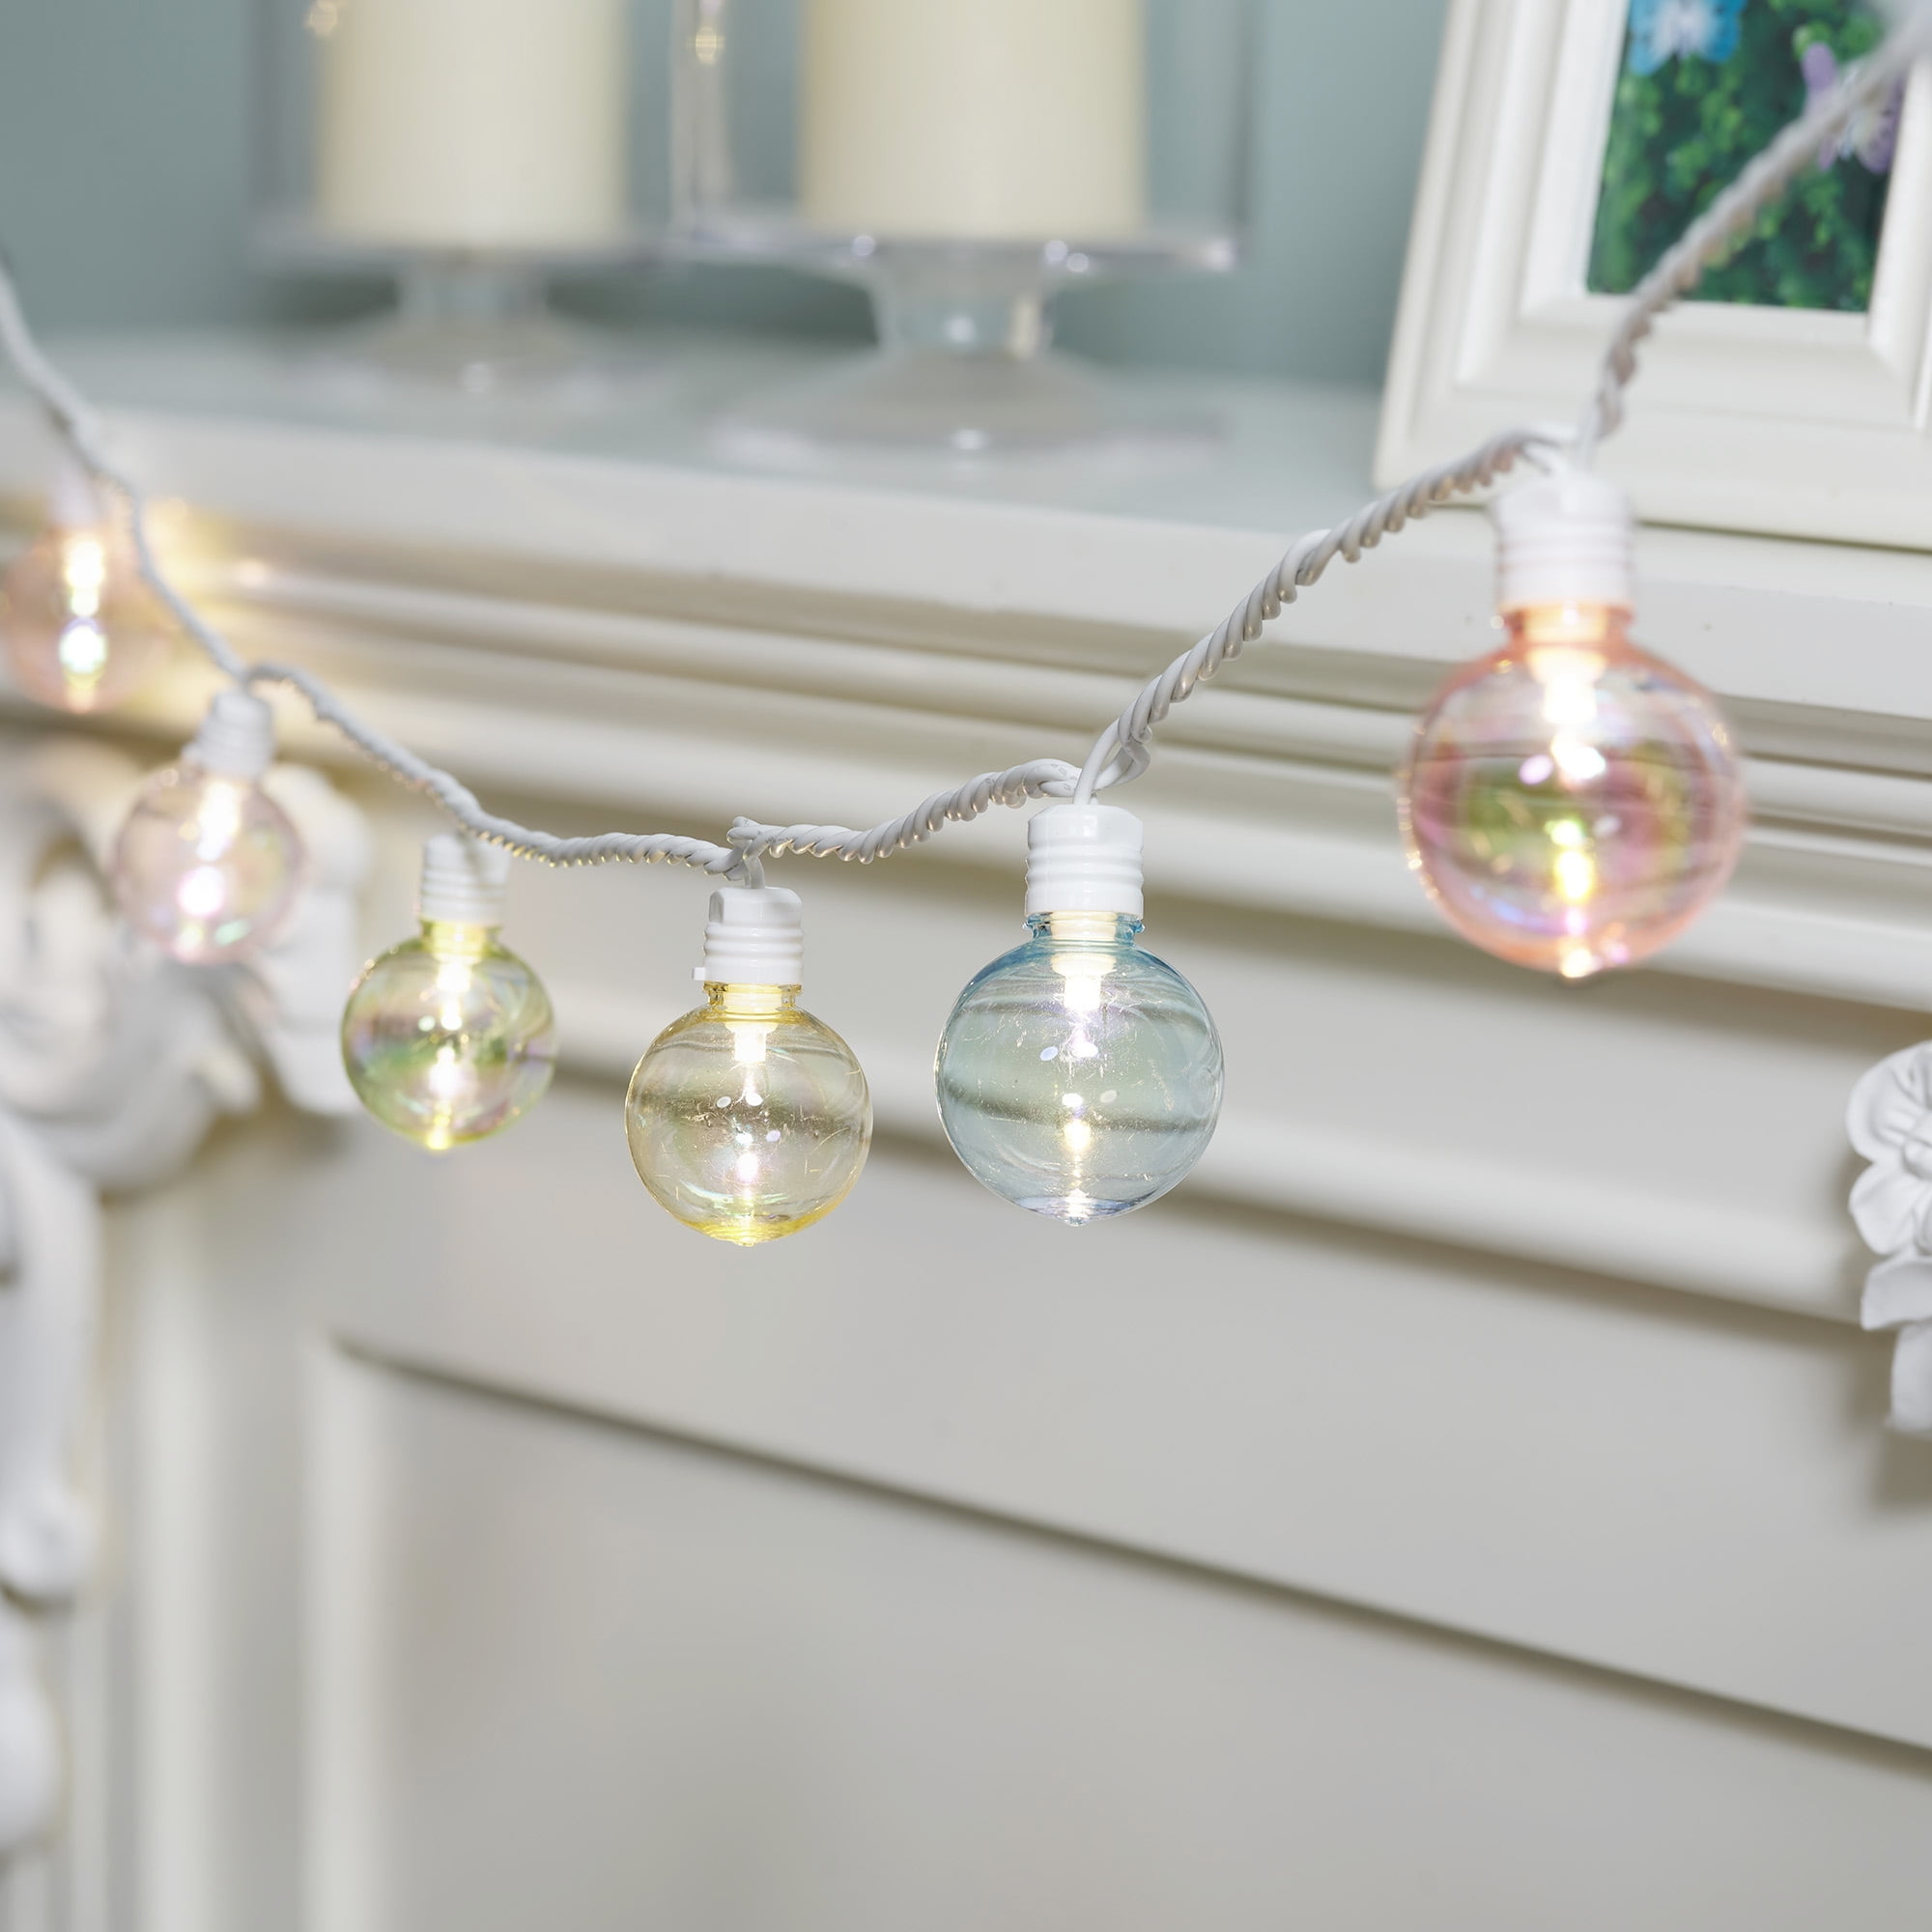 Mainstays 10-Count Indoor LED Fairy Globe Lights, with Transparent